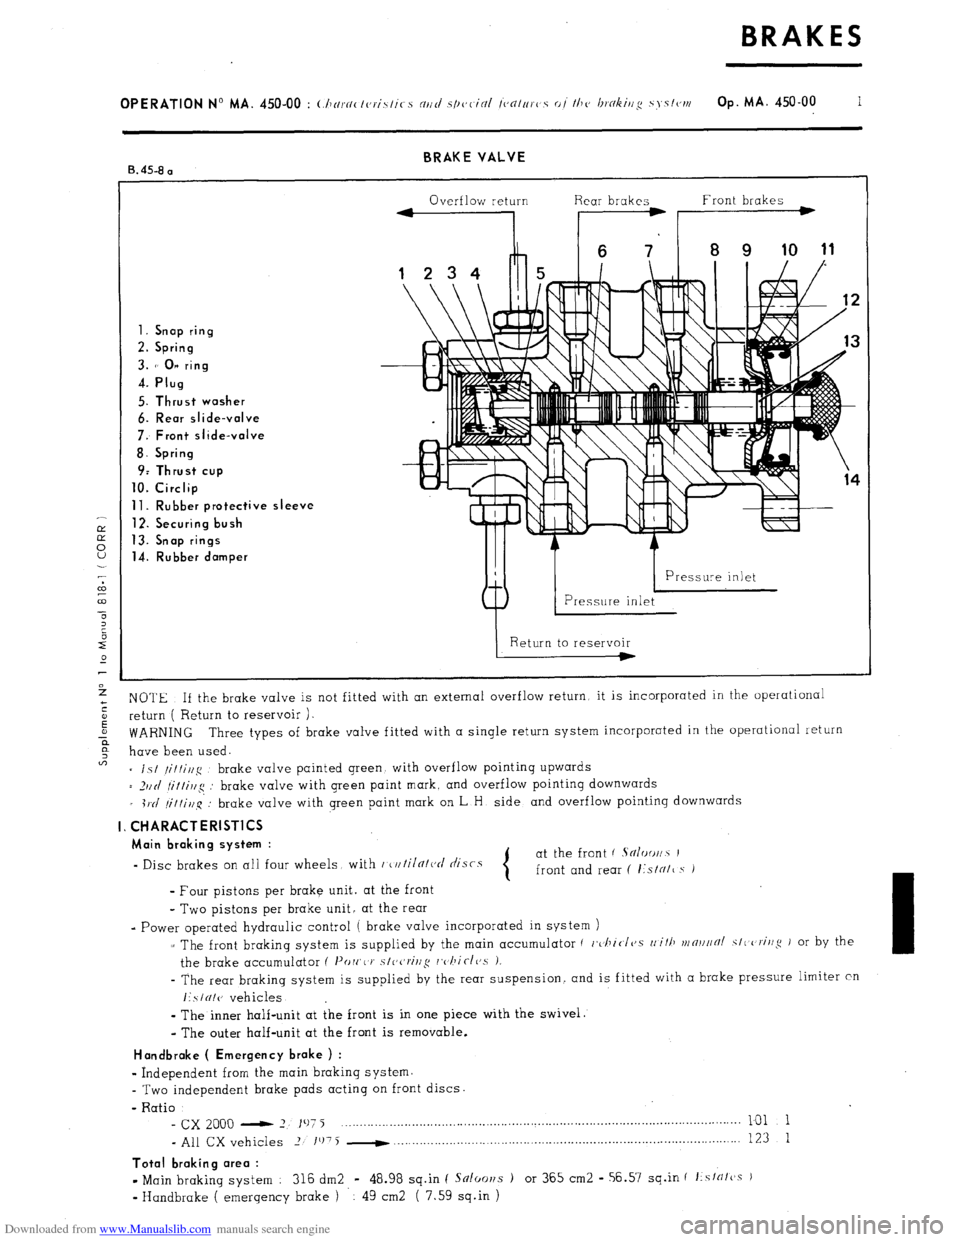 Citroen CX 1982 1.G Workshop Manual Downloaded from www.Manualslib.com manuals search engine BRAKE VALVE 
B. 45-8 a 
Overflow return Rear brakes Front brakes 
1. Snap ring 
2. Spring 
3. 1’ 0” ring 
4. Plug 
5. Thrust washer 
6. Rea